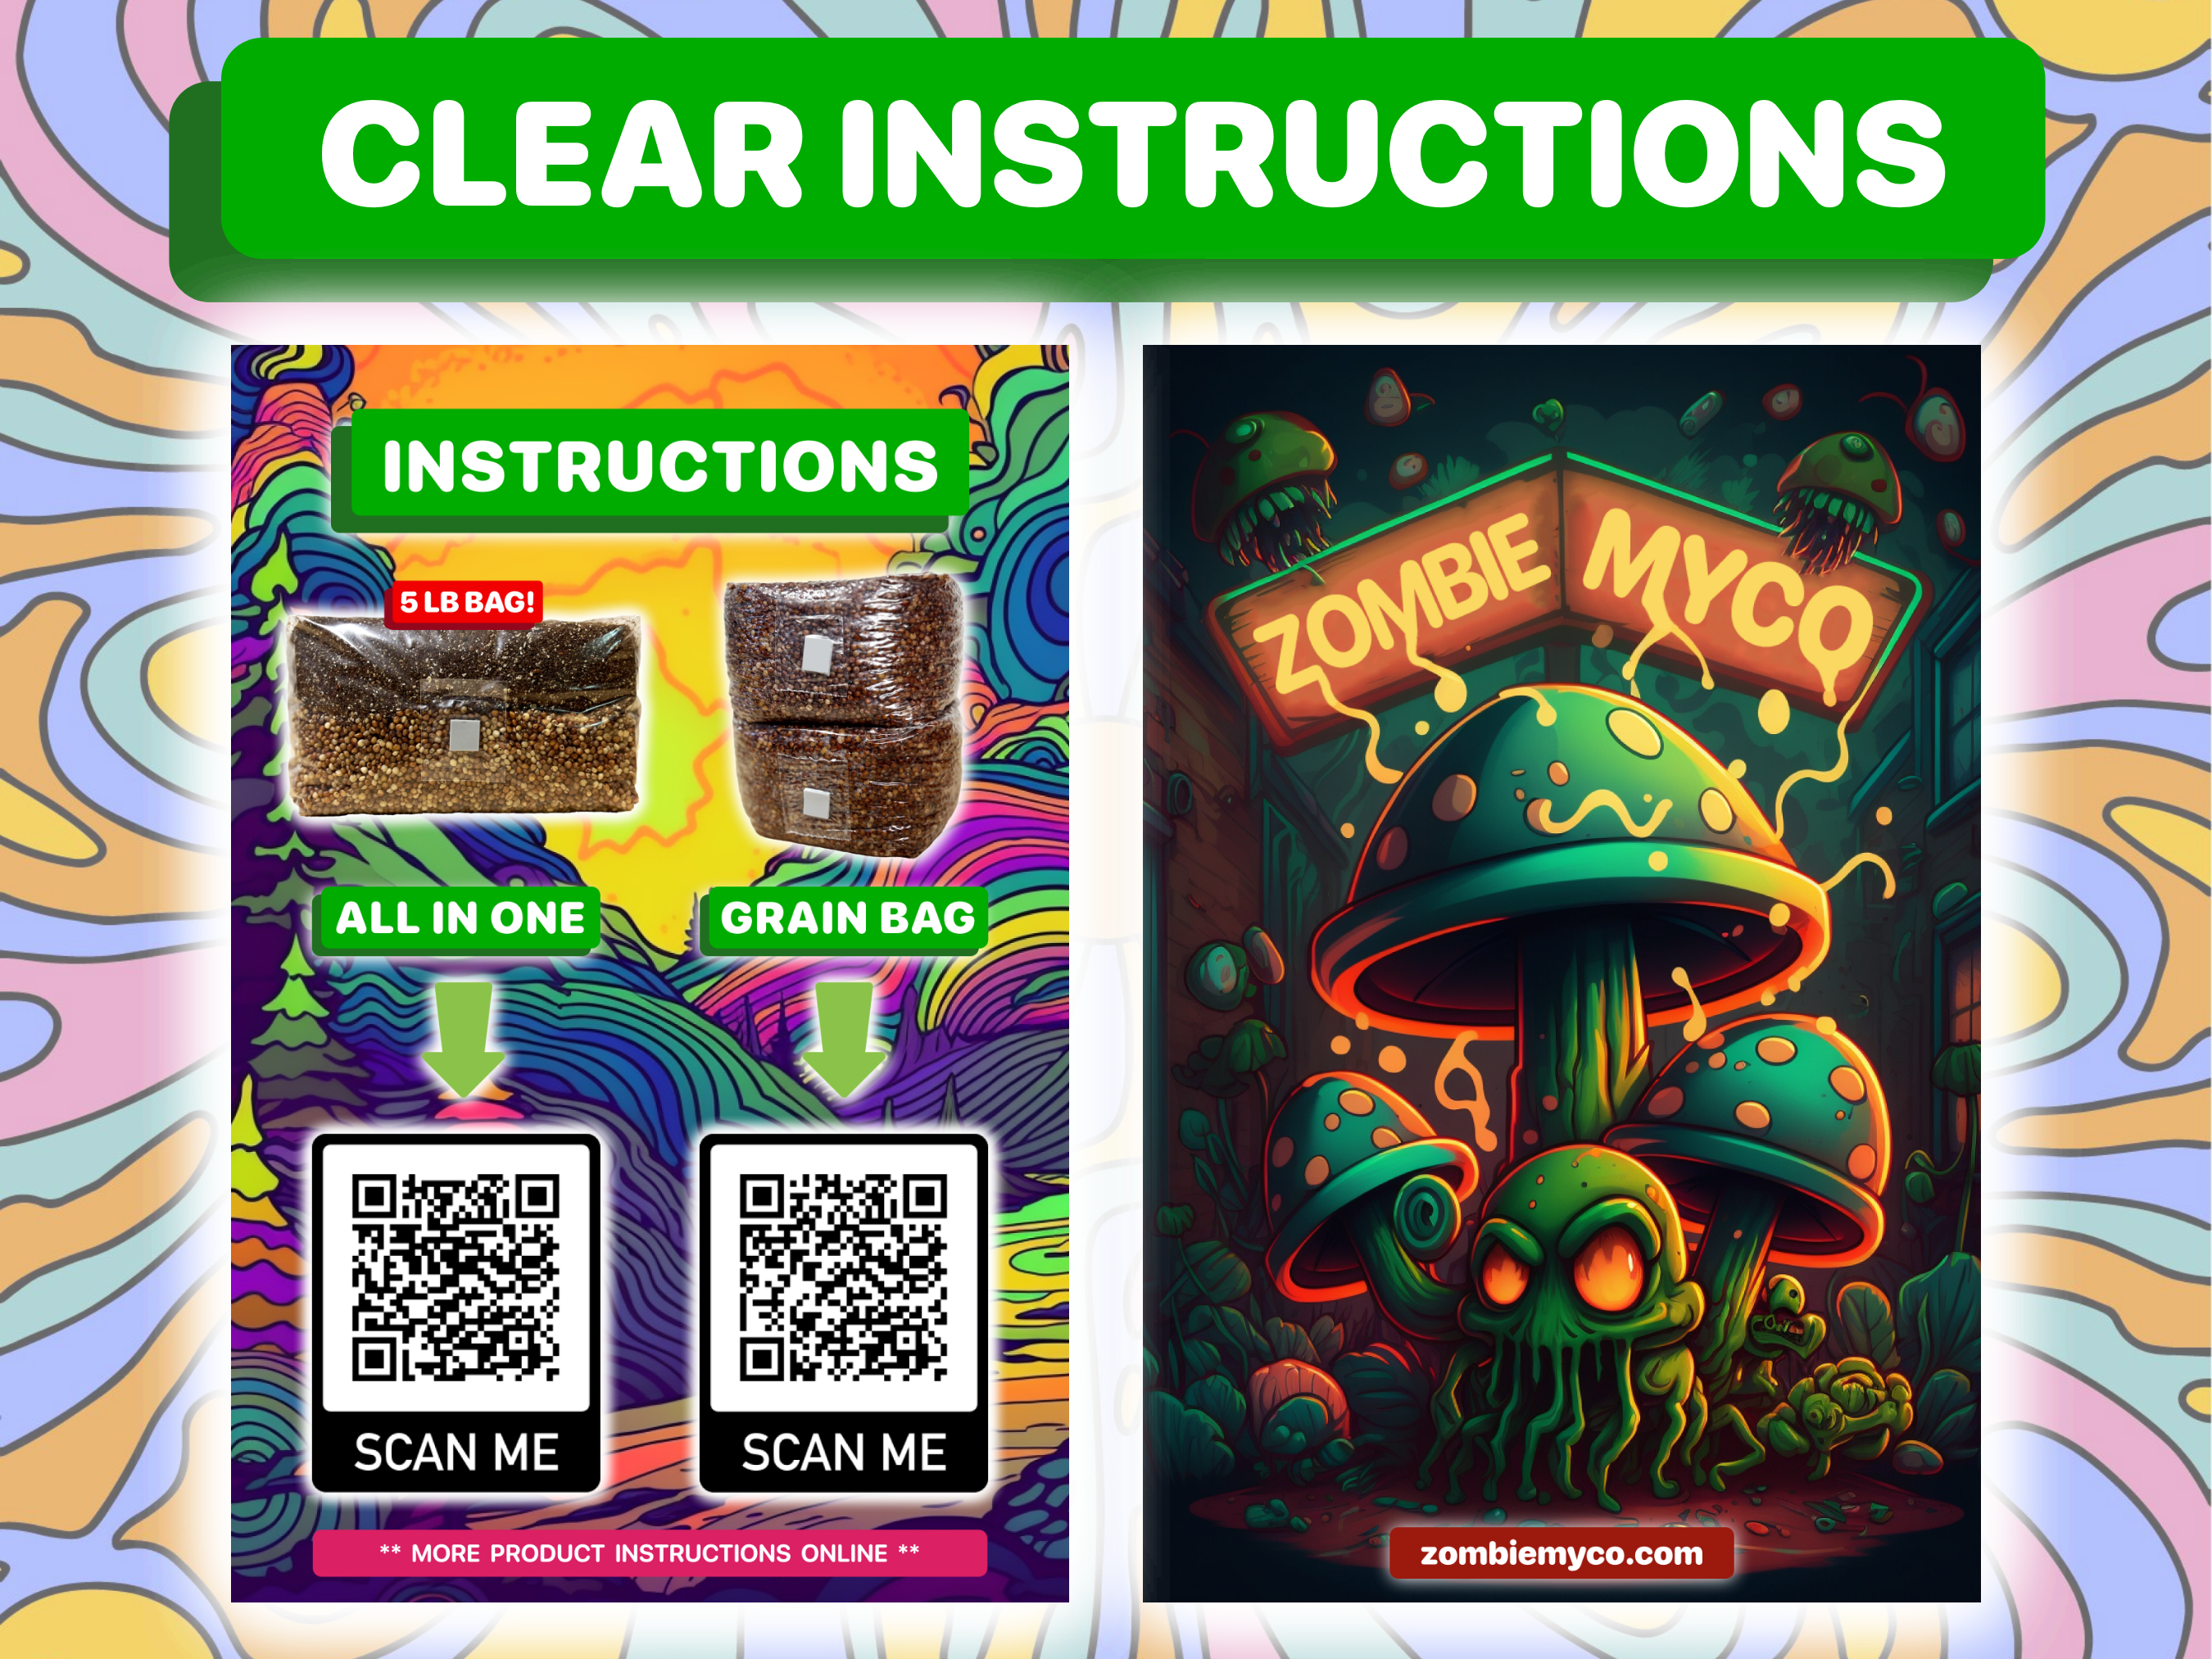 an image of clear instructions on purchase details thru QR code - all in one and grain bag